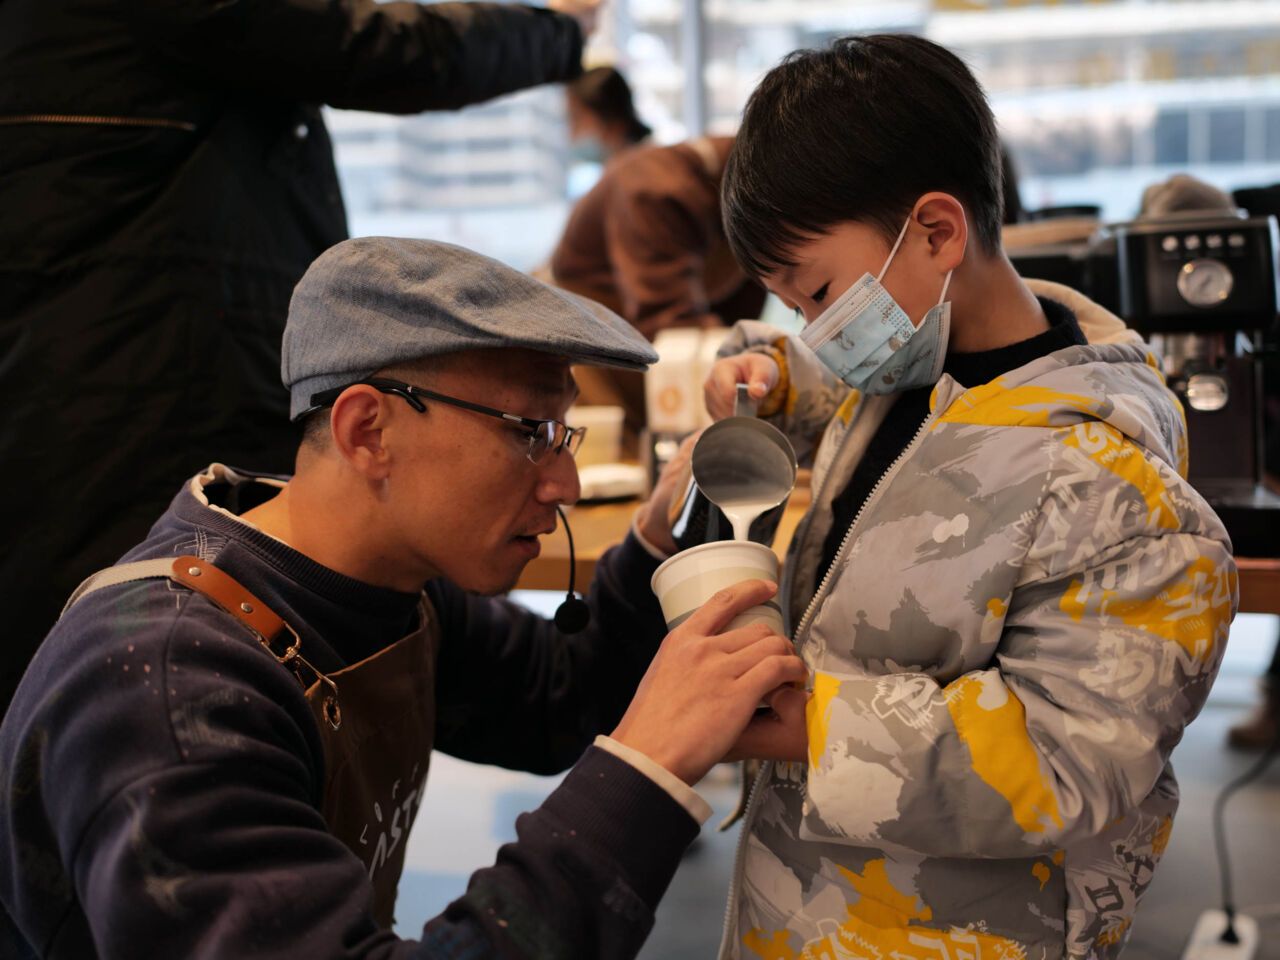 WorldSkills Museum celebrates Lunar New Year with a skills carnival